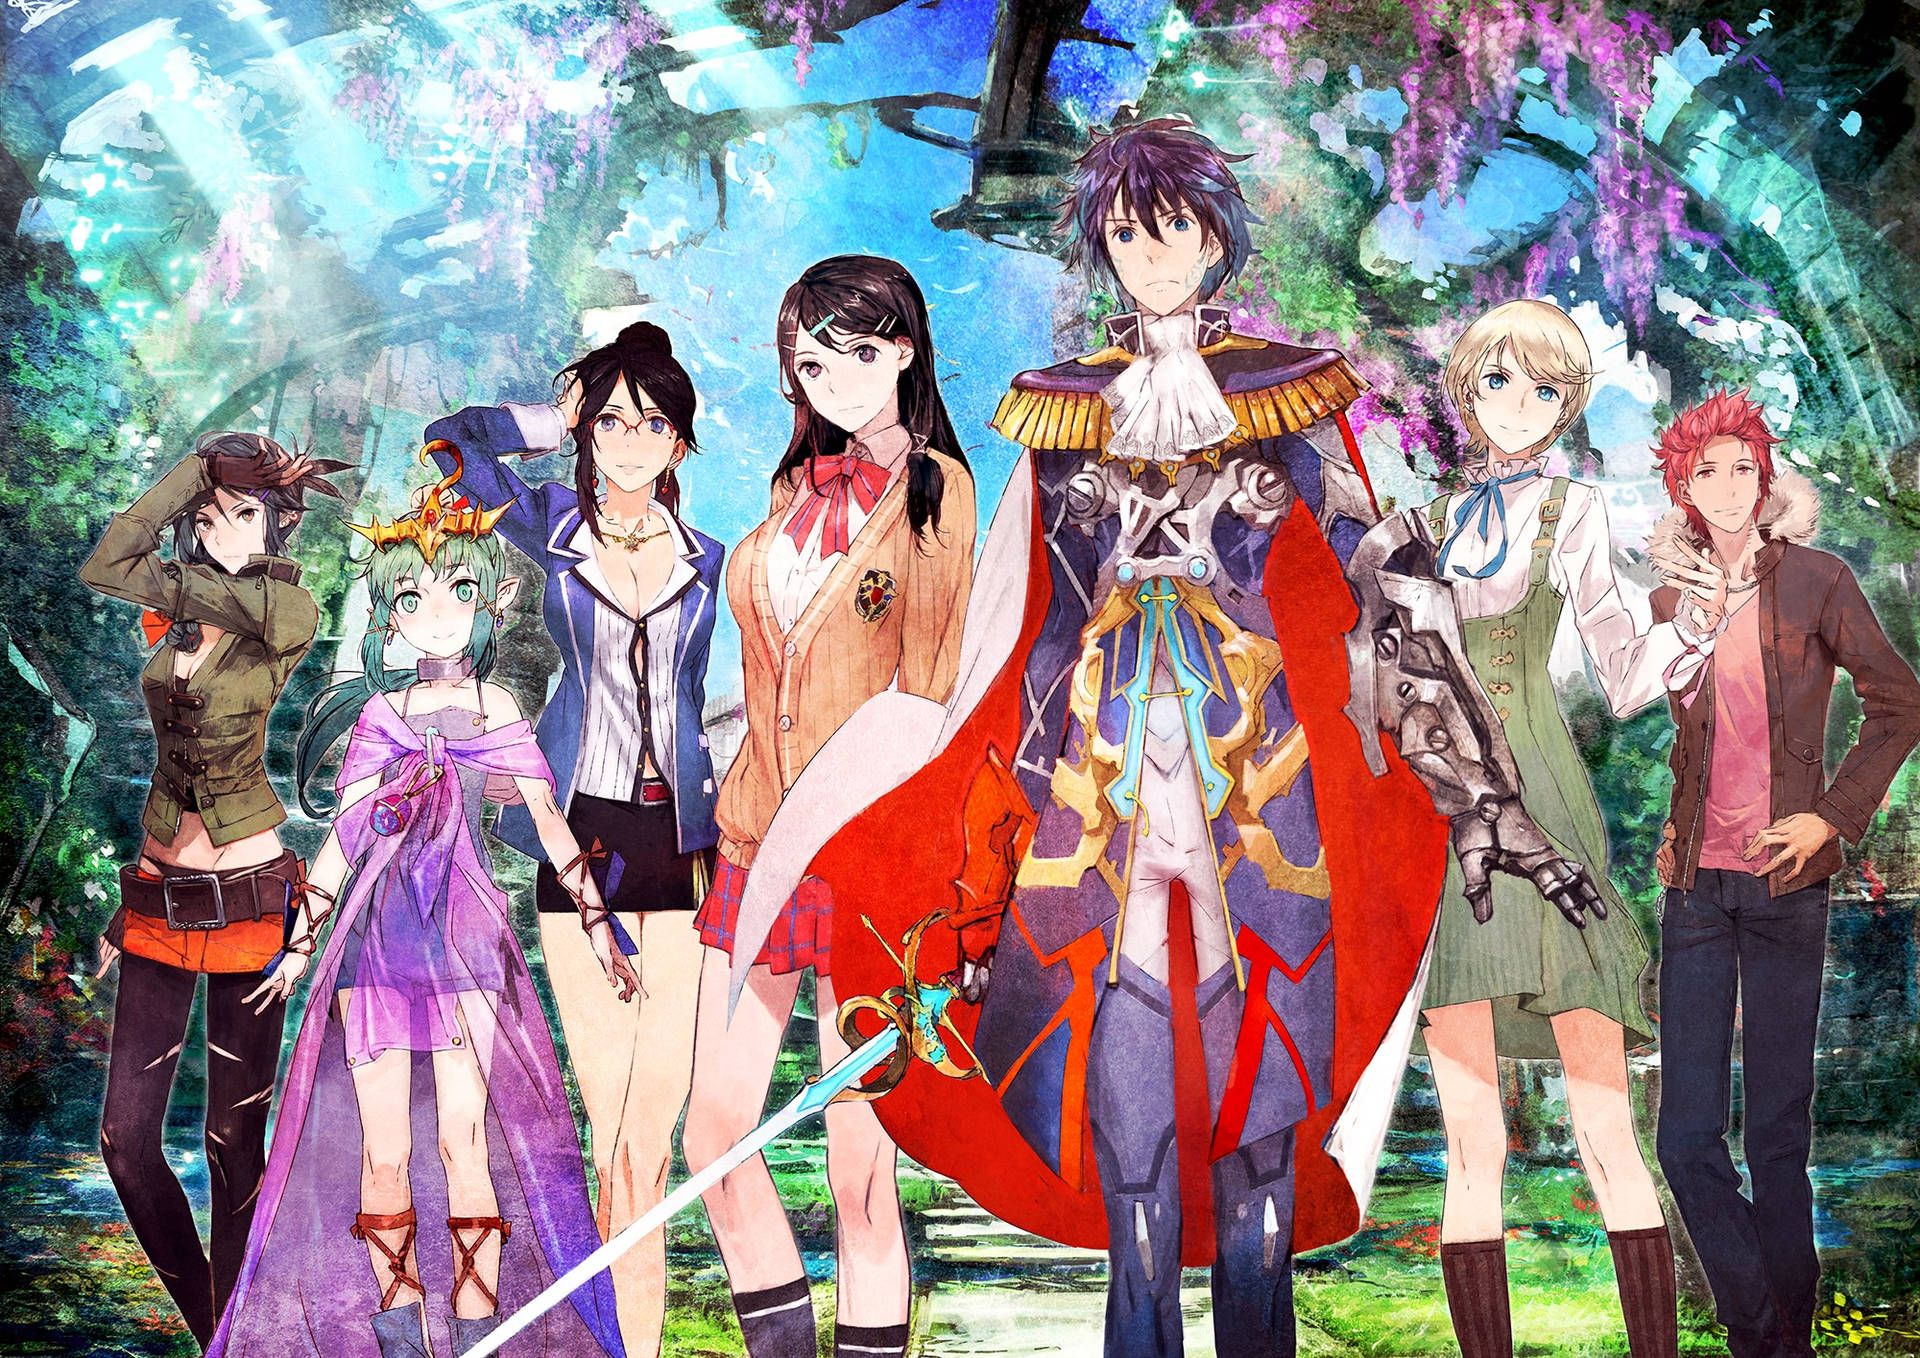 Tokyo Mirage Sessions With Itsuki Taking Center Stage Background